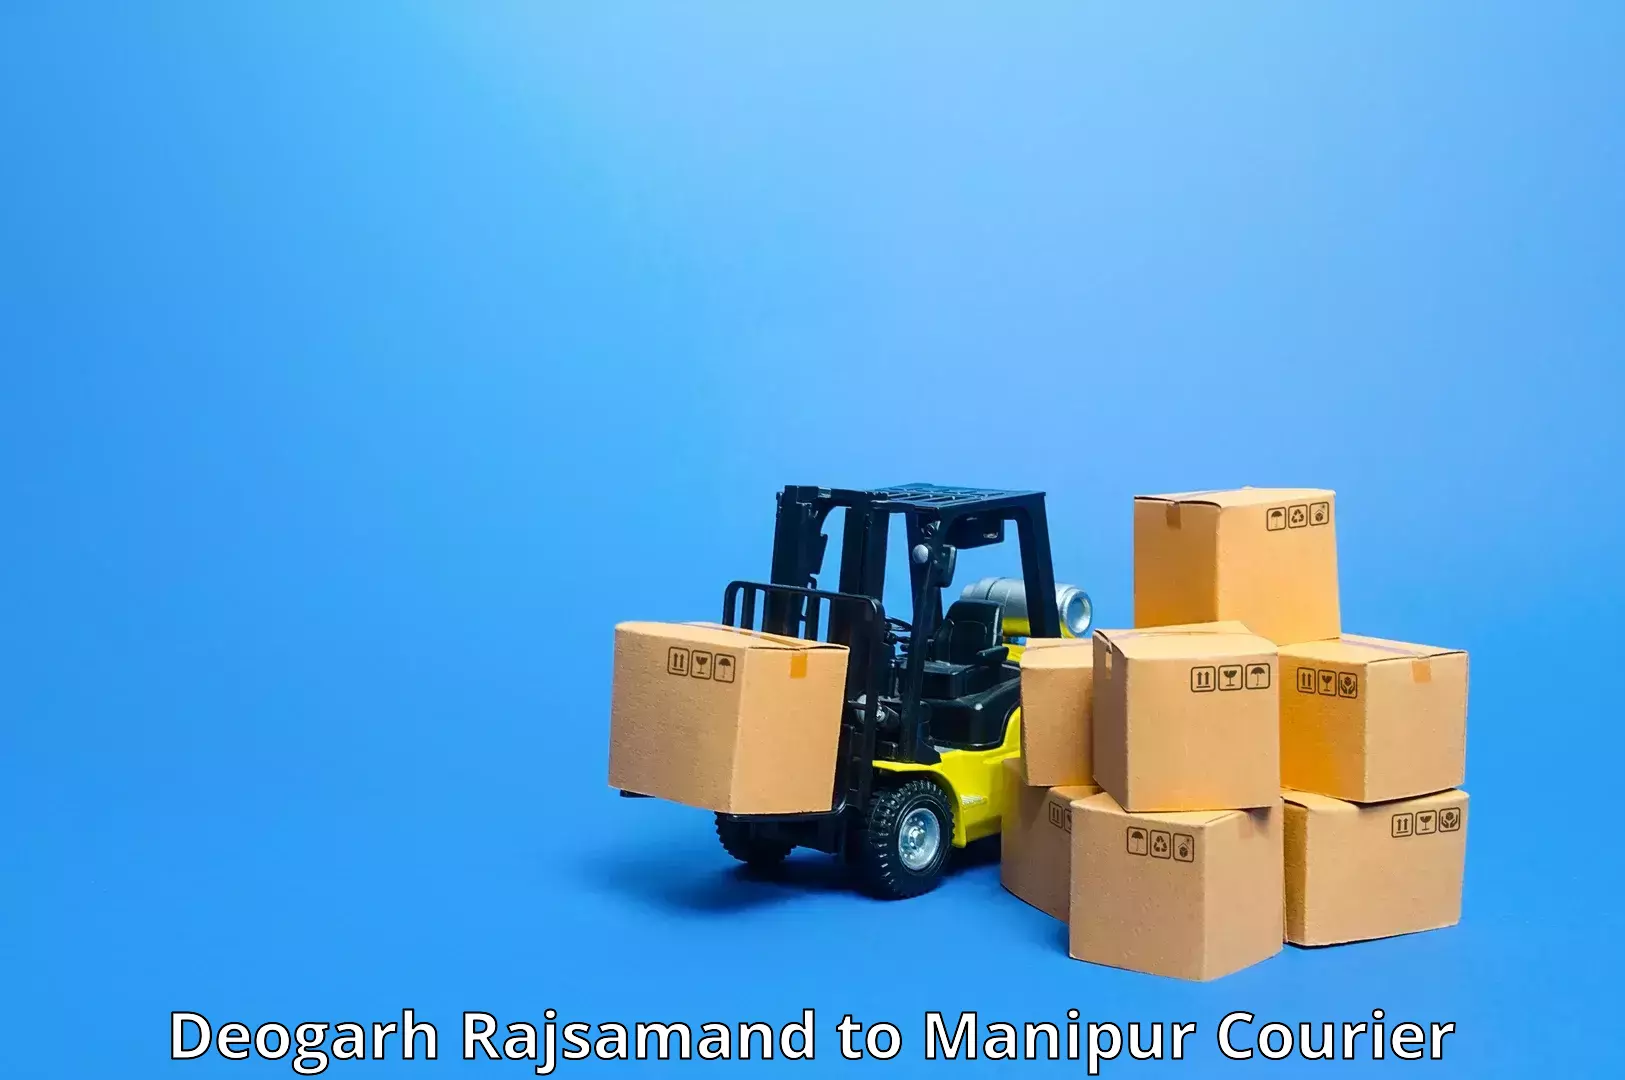 Residential courier service Deogarh Rajsamand to Chandel